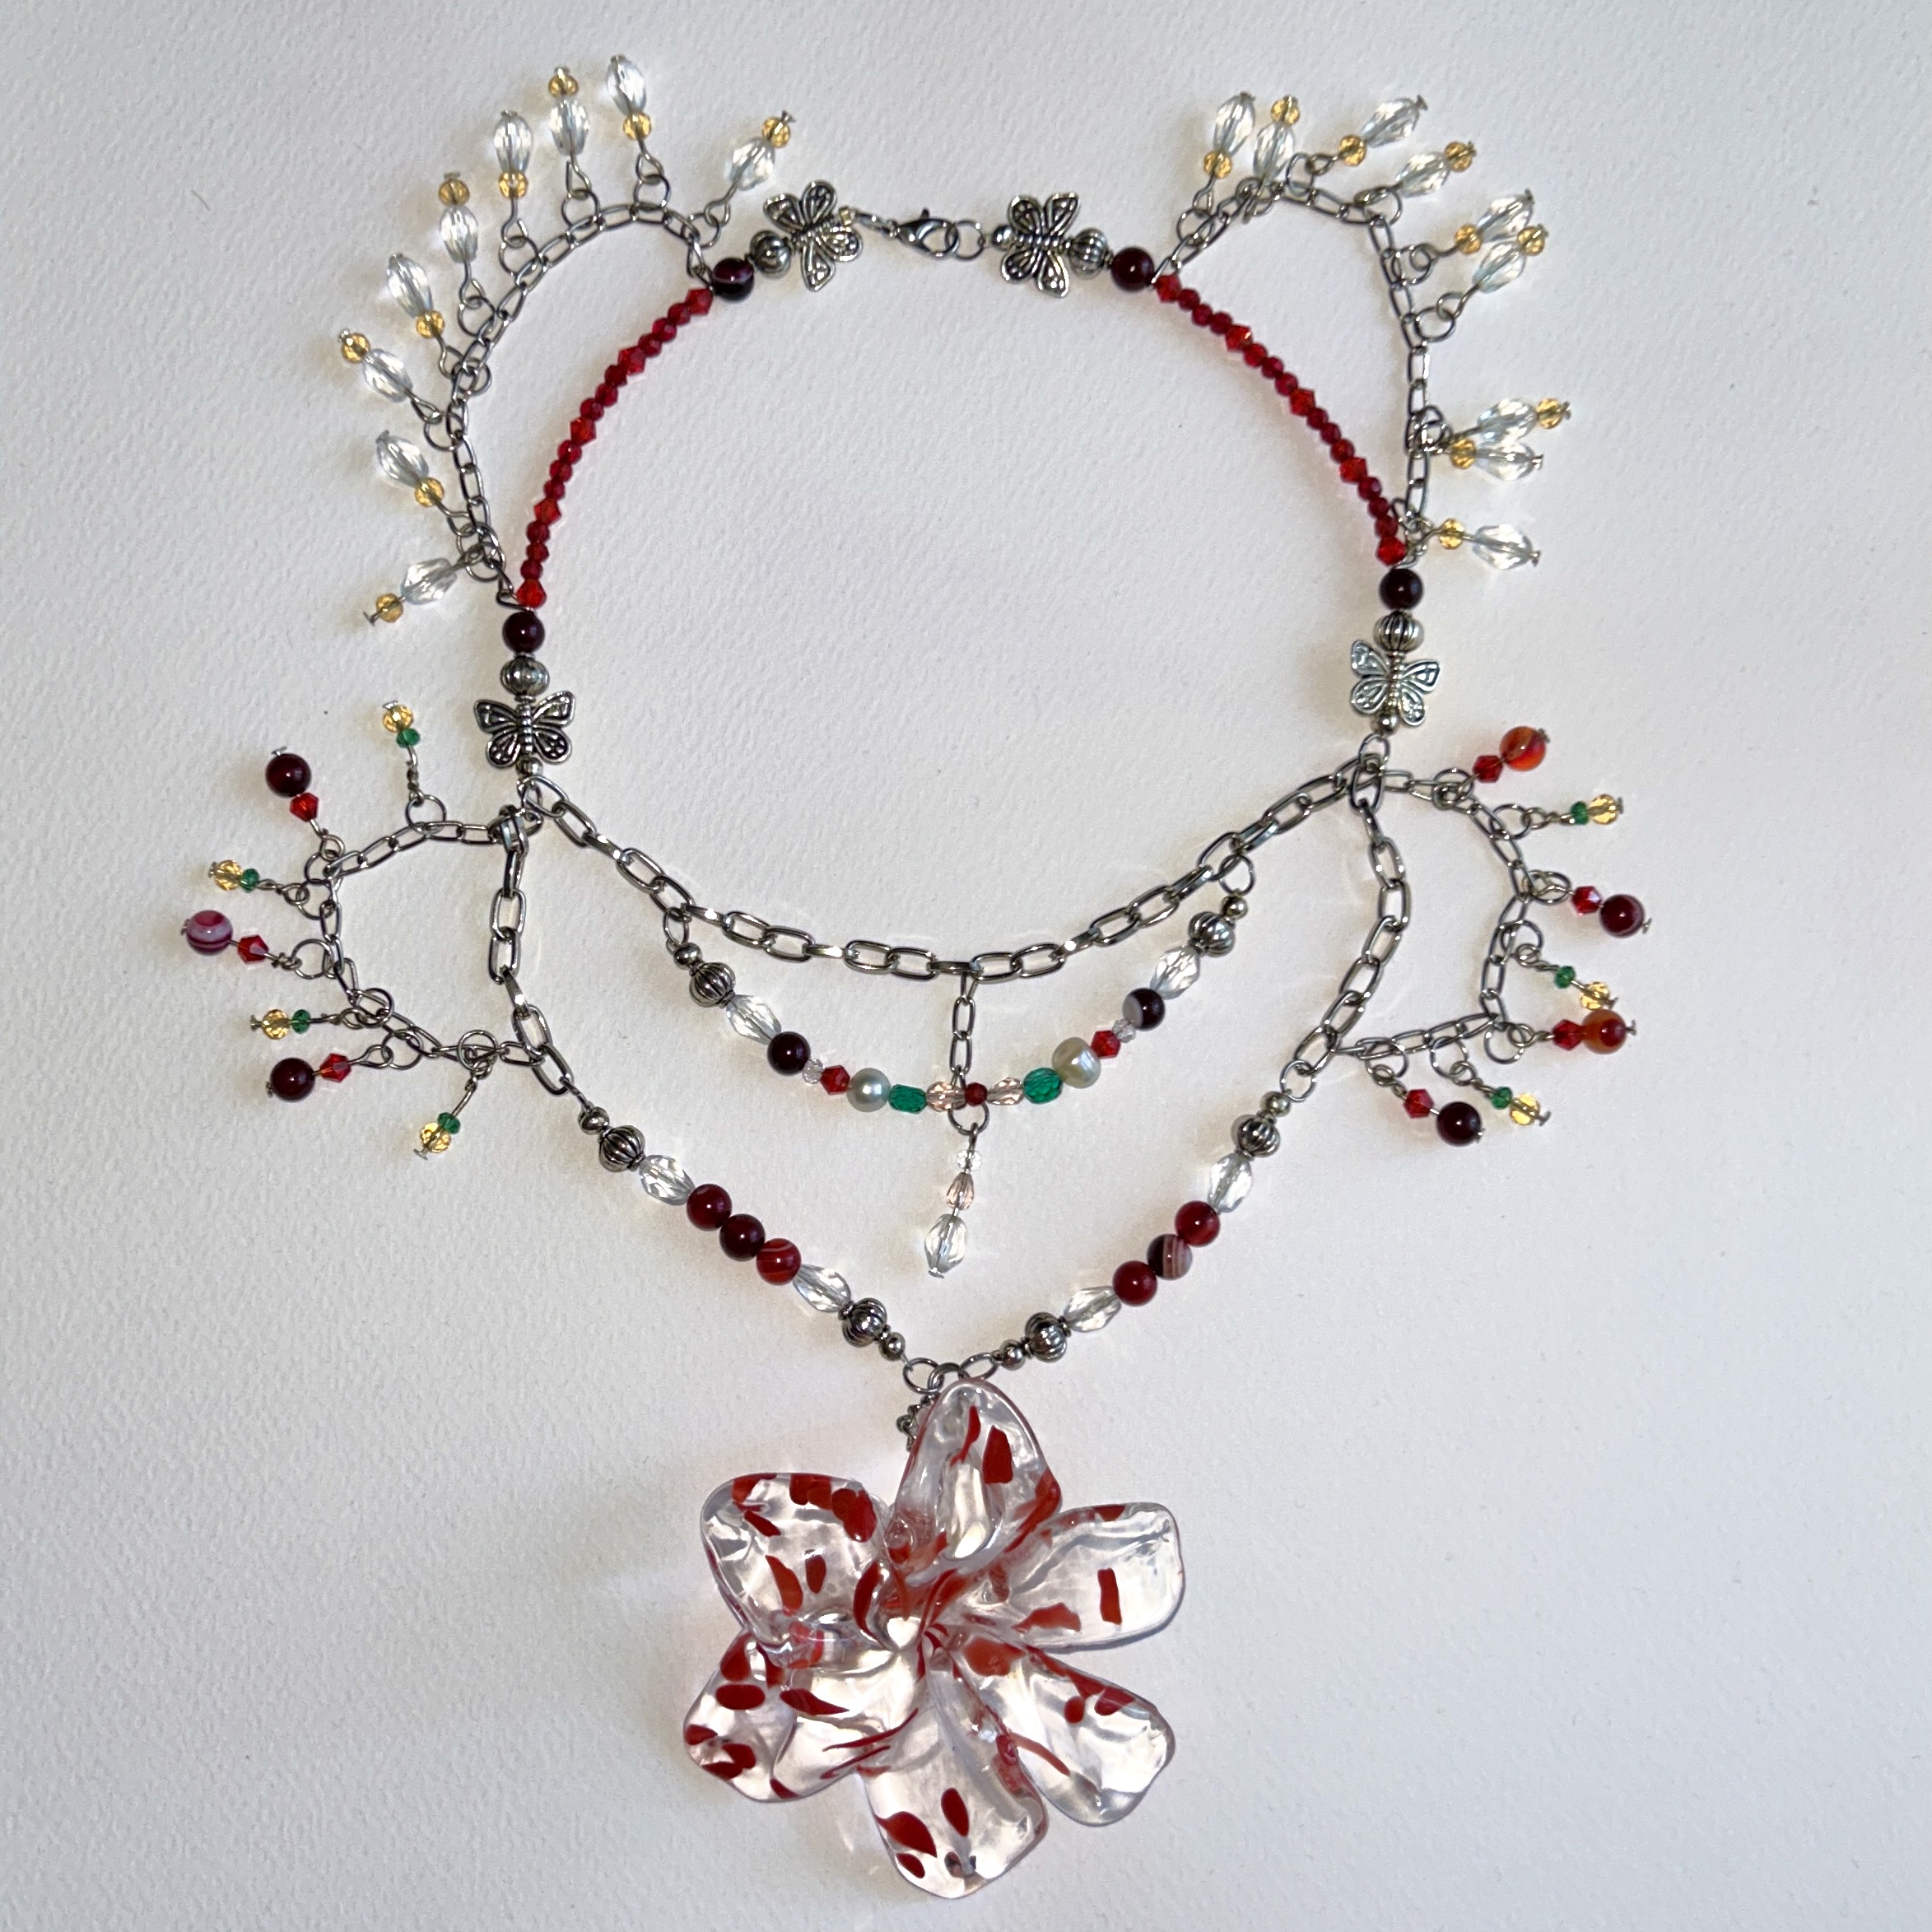 beaded necklace with handmade red and transparent glass flower pendant